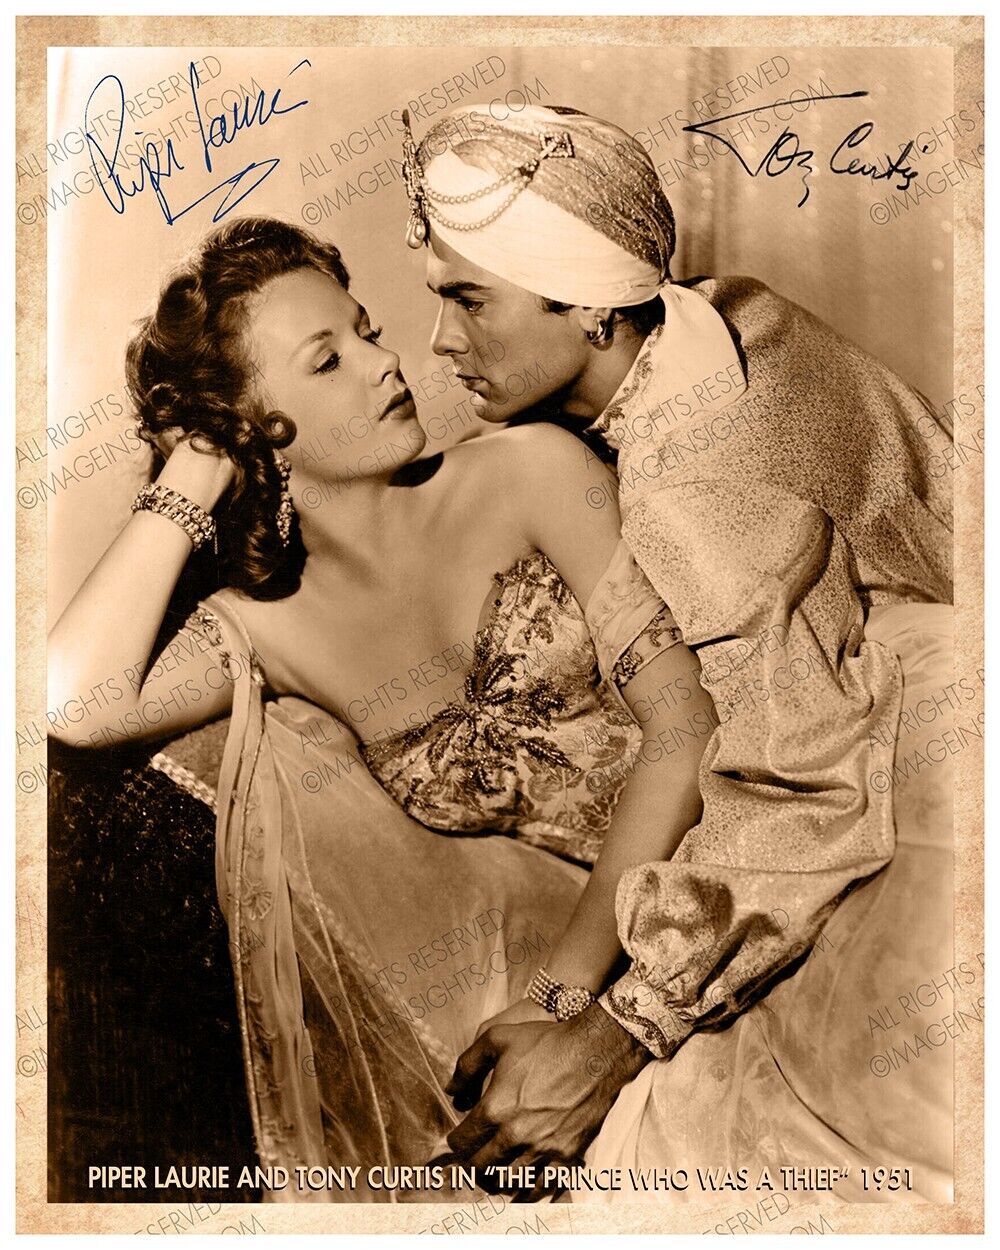 PIPER LAURIE TONY CURTIS 1951 Prince Who Was A Thief\